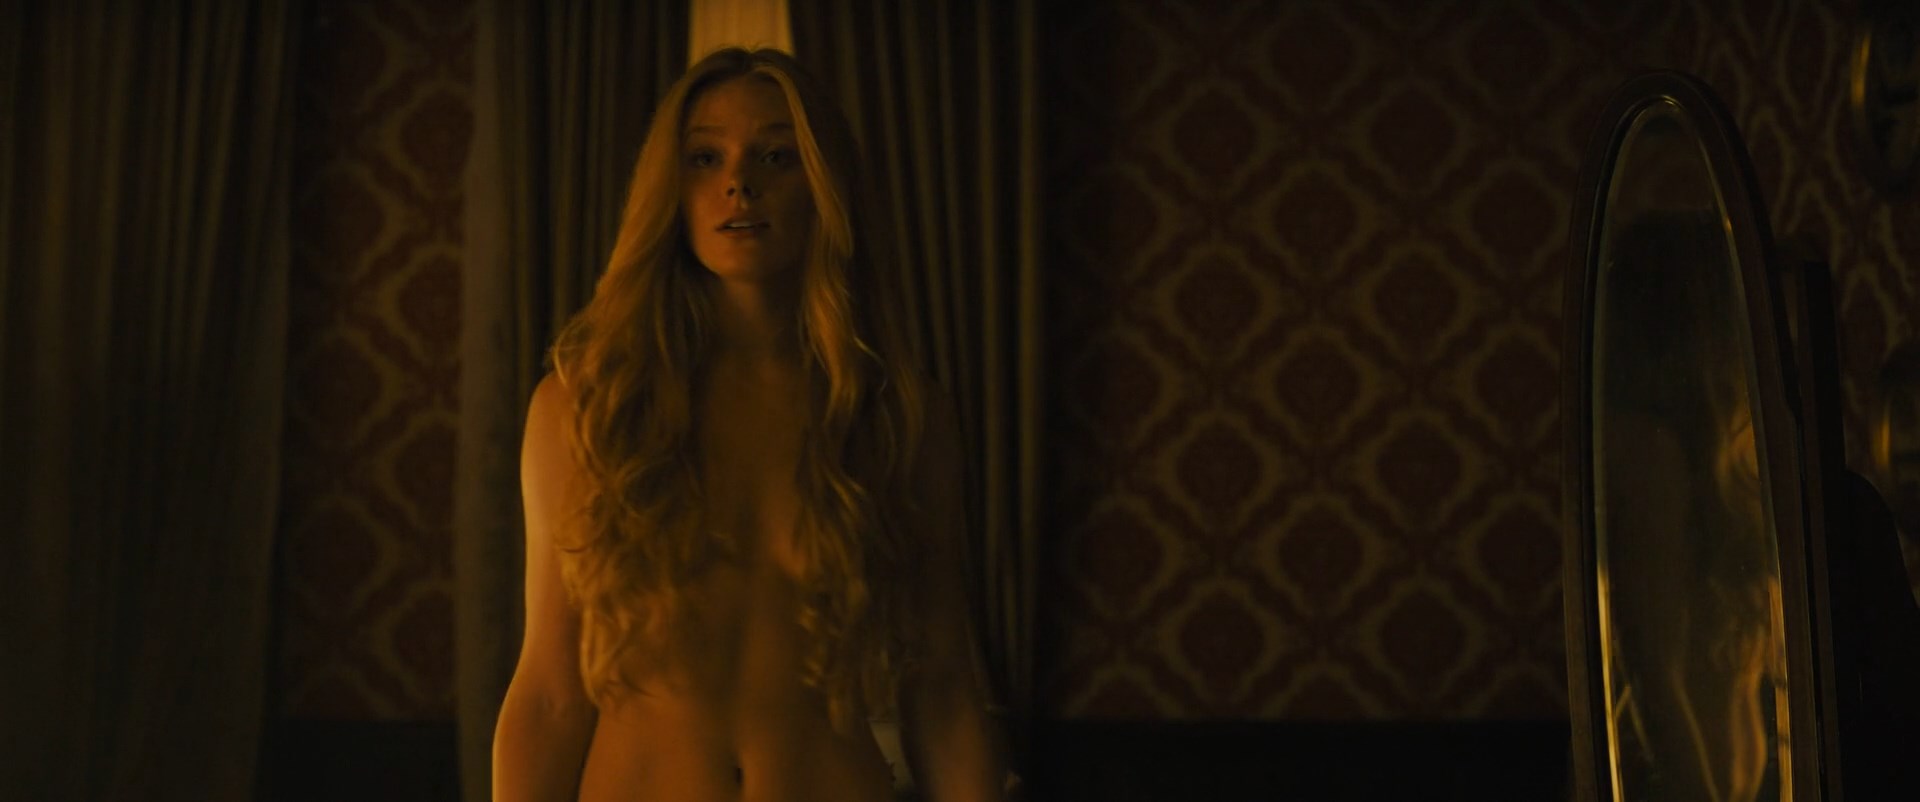 Abigail Cowen has nude moments in the movie “Redeeming Love” which was rele...